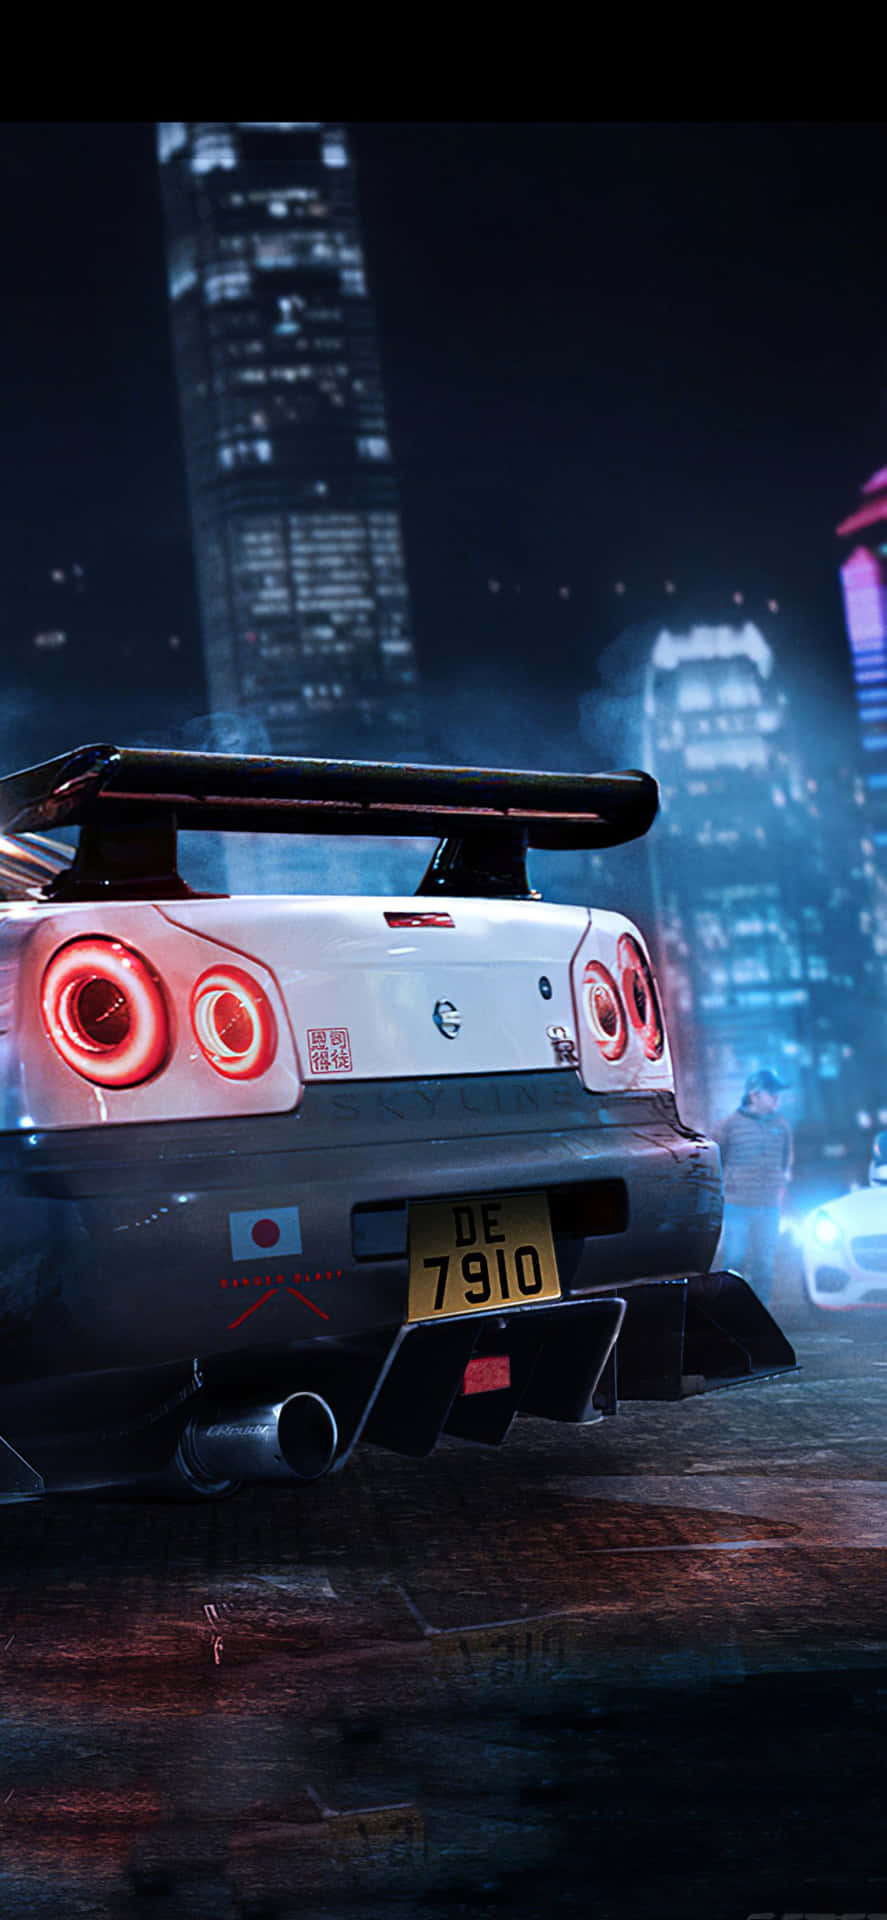 Show Off Your Style with the Nissan Skyline iPhone Wallpaper